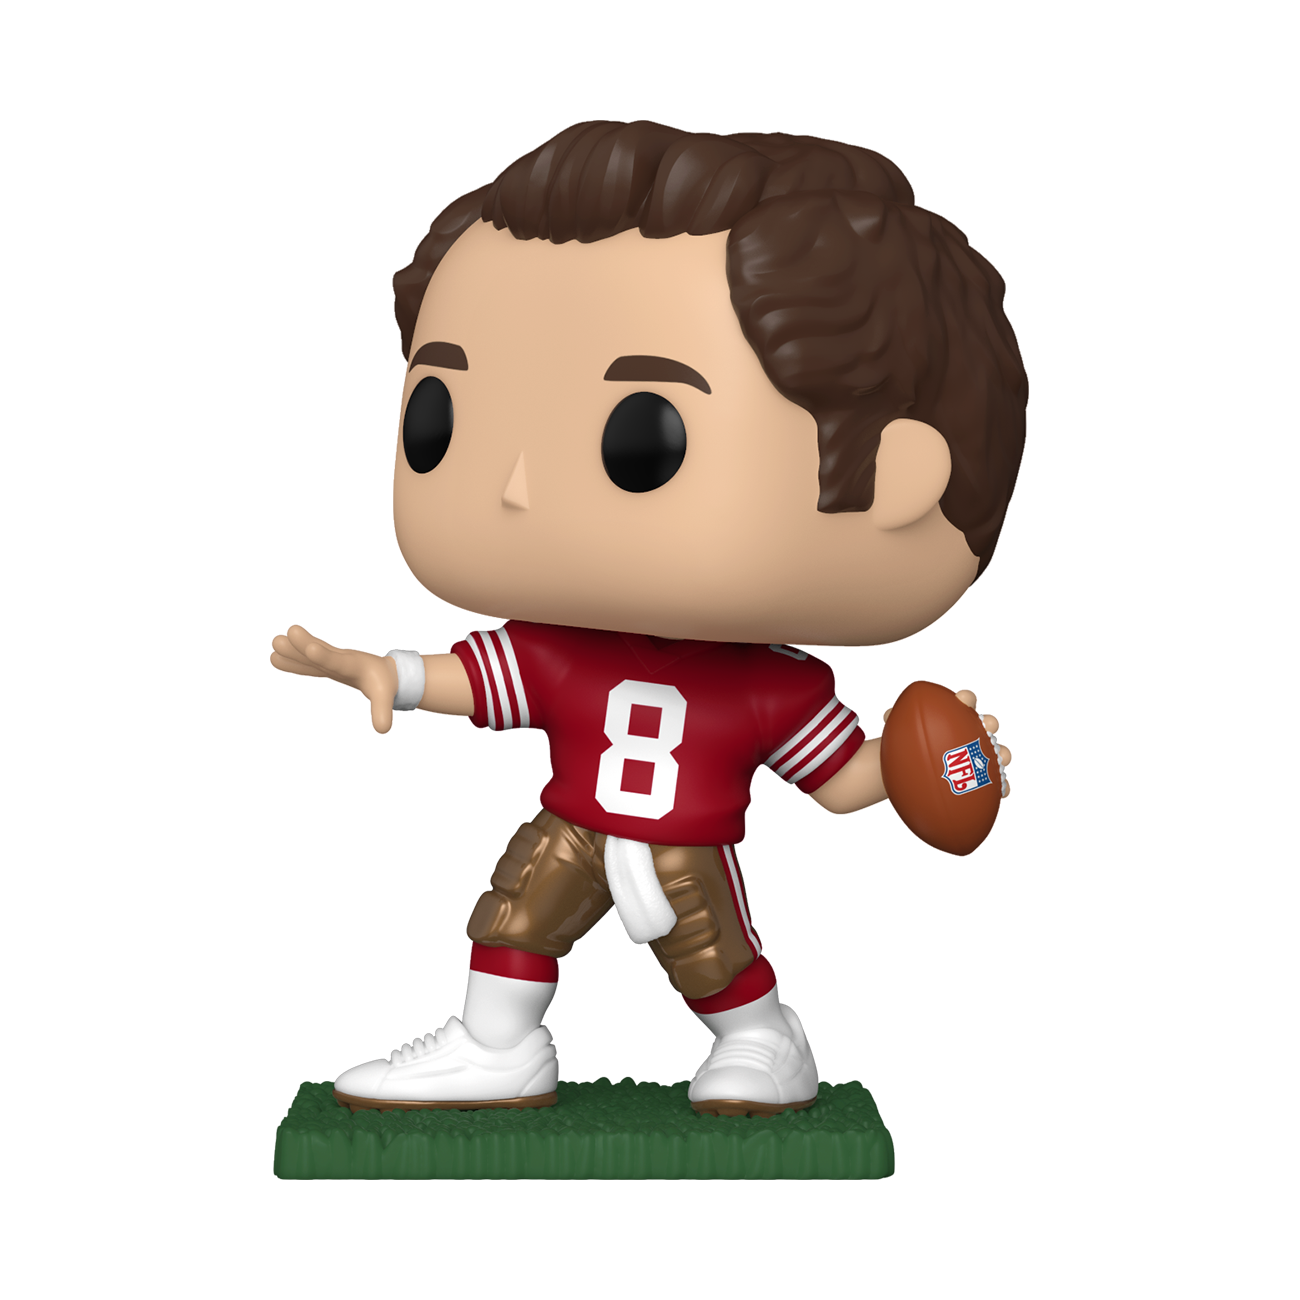 Nfl 49ers Funko Pop Steve Young Pre Order Big Apple Collectibles